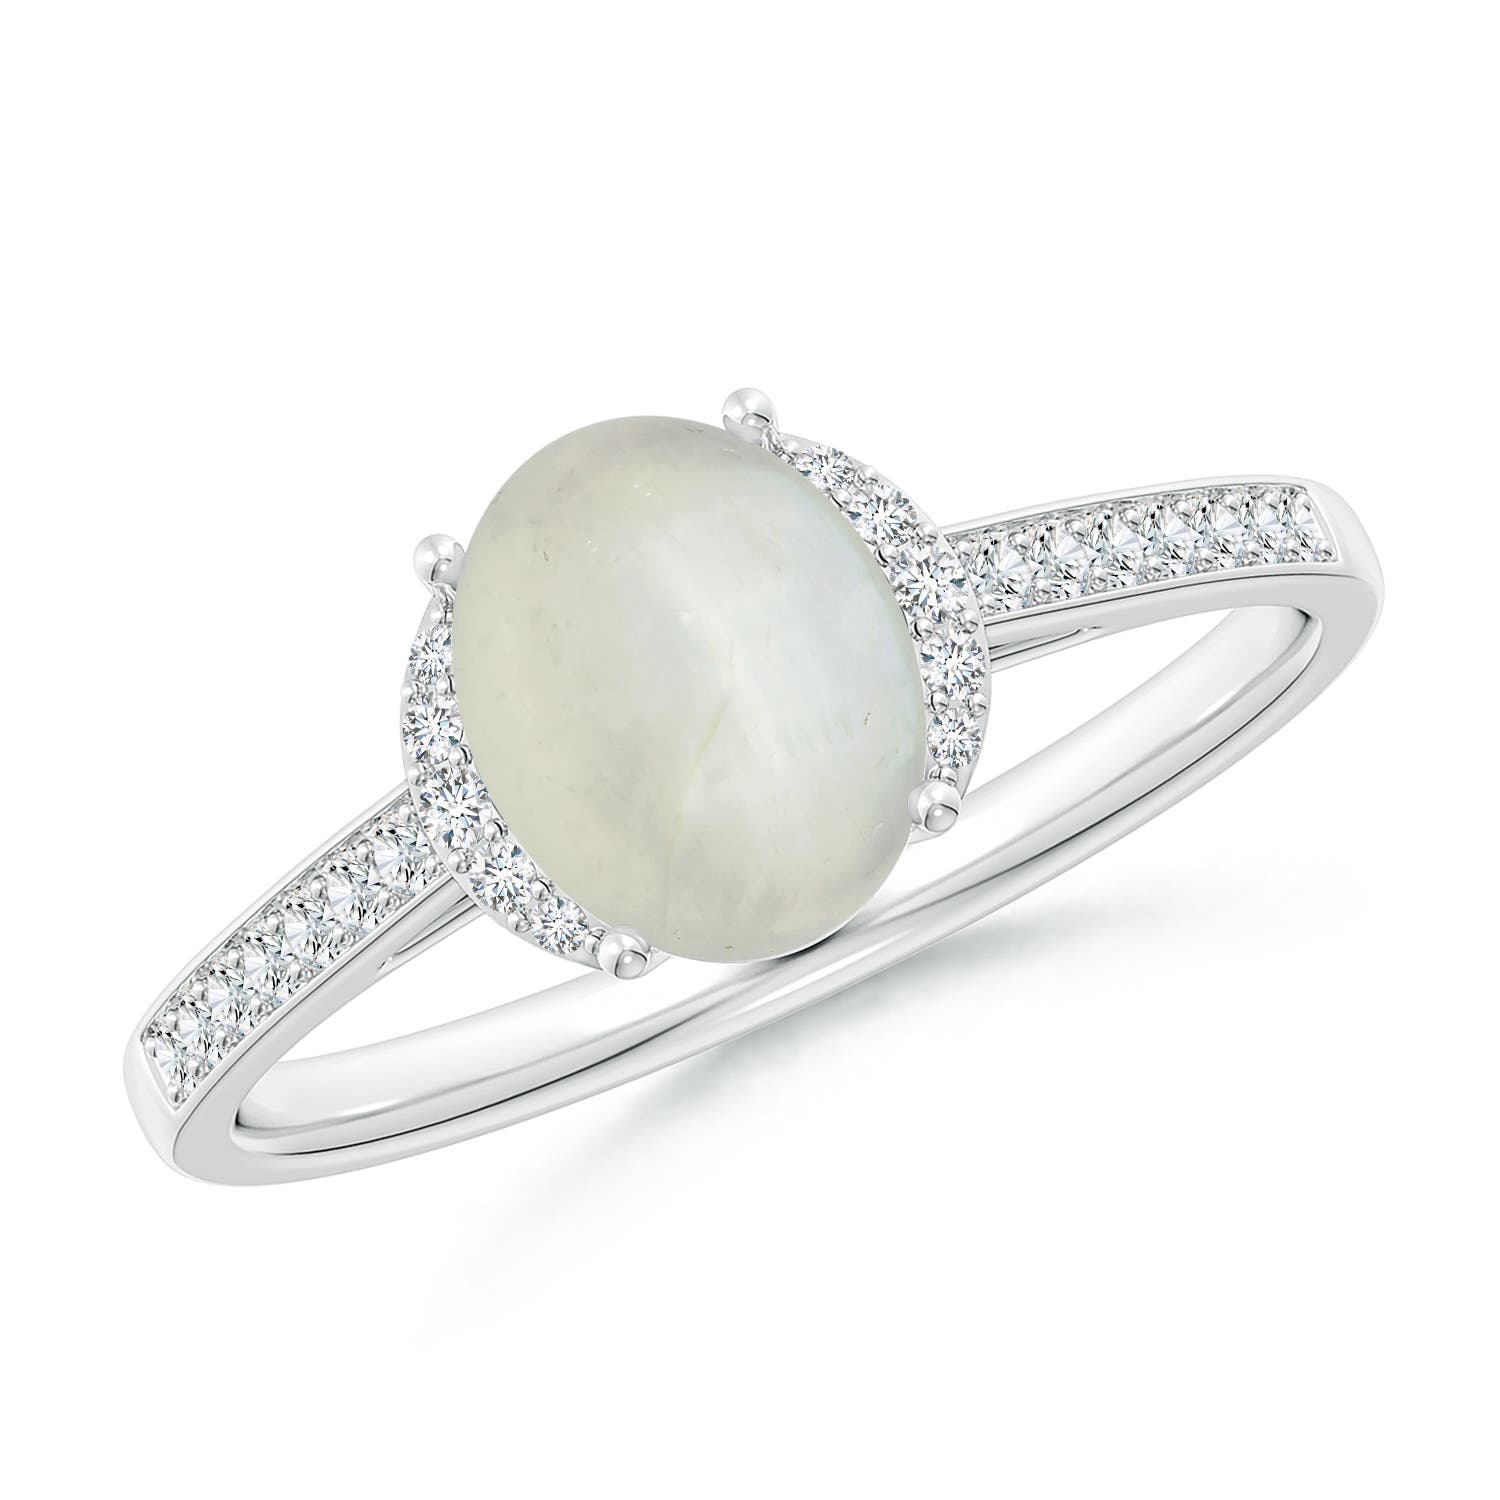 AA - Moonstone / 1.23 CT / 14 KT White Gold